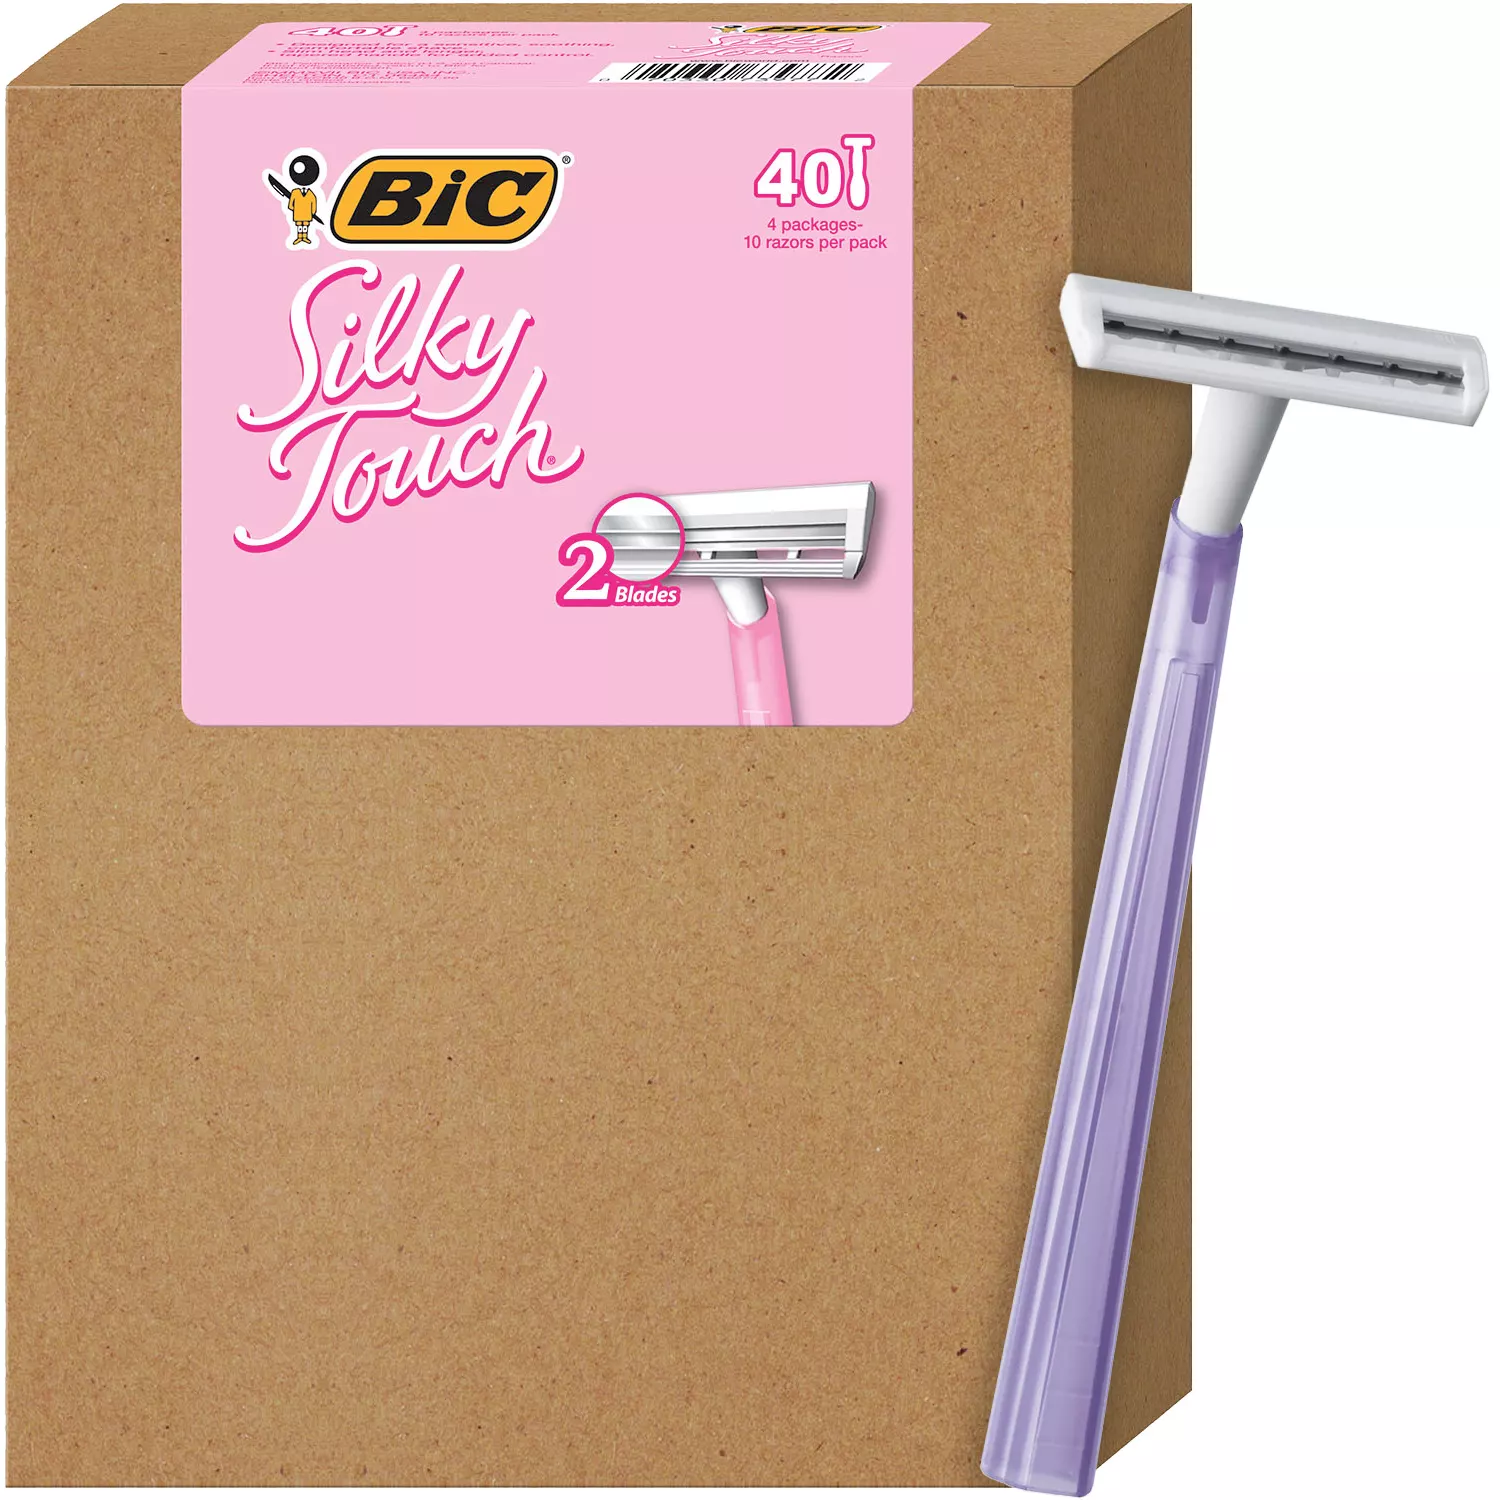 BIC Silky Touch Women’s Disposable Razor (40 ct.)